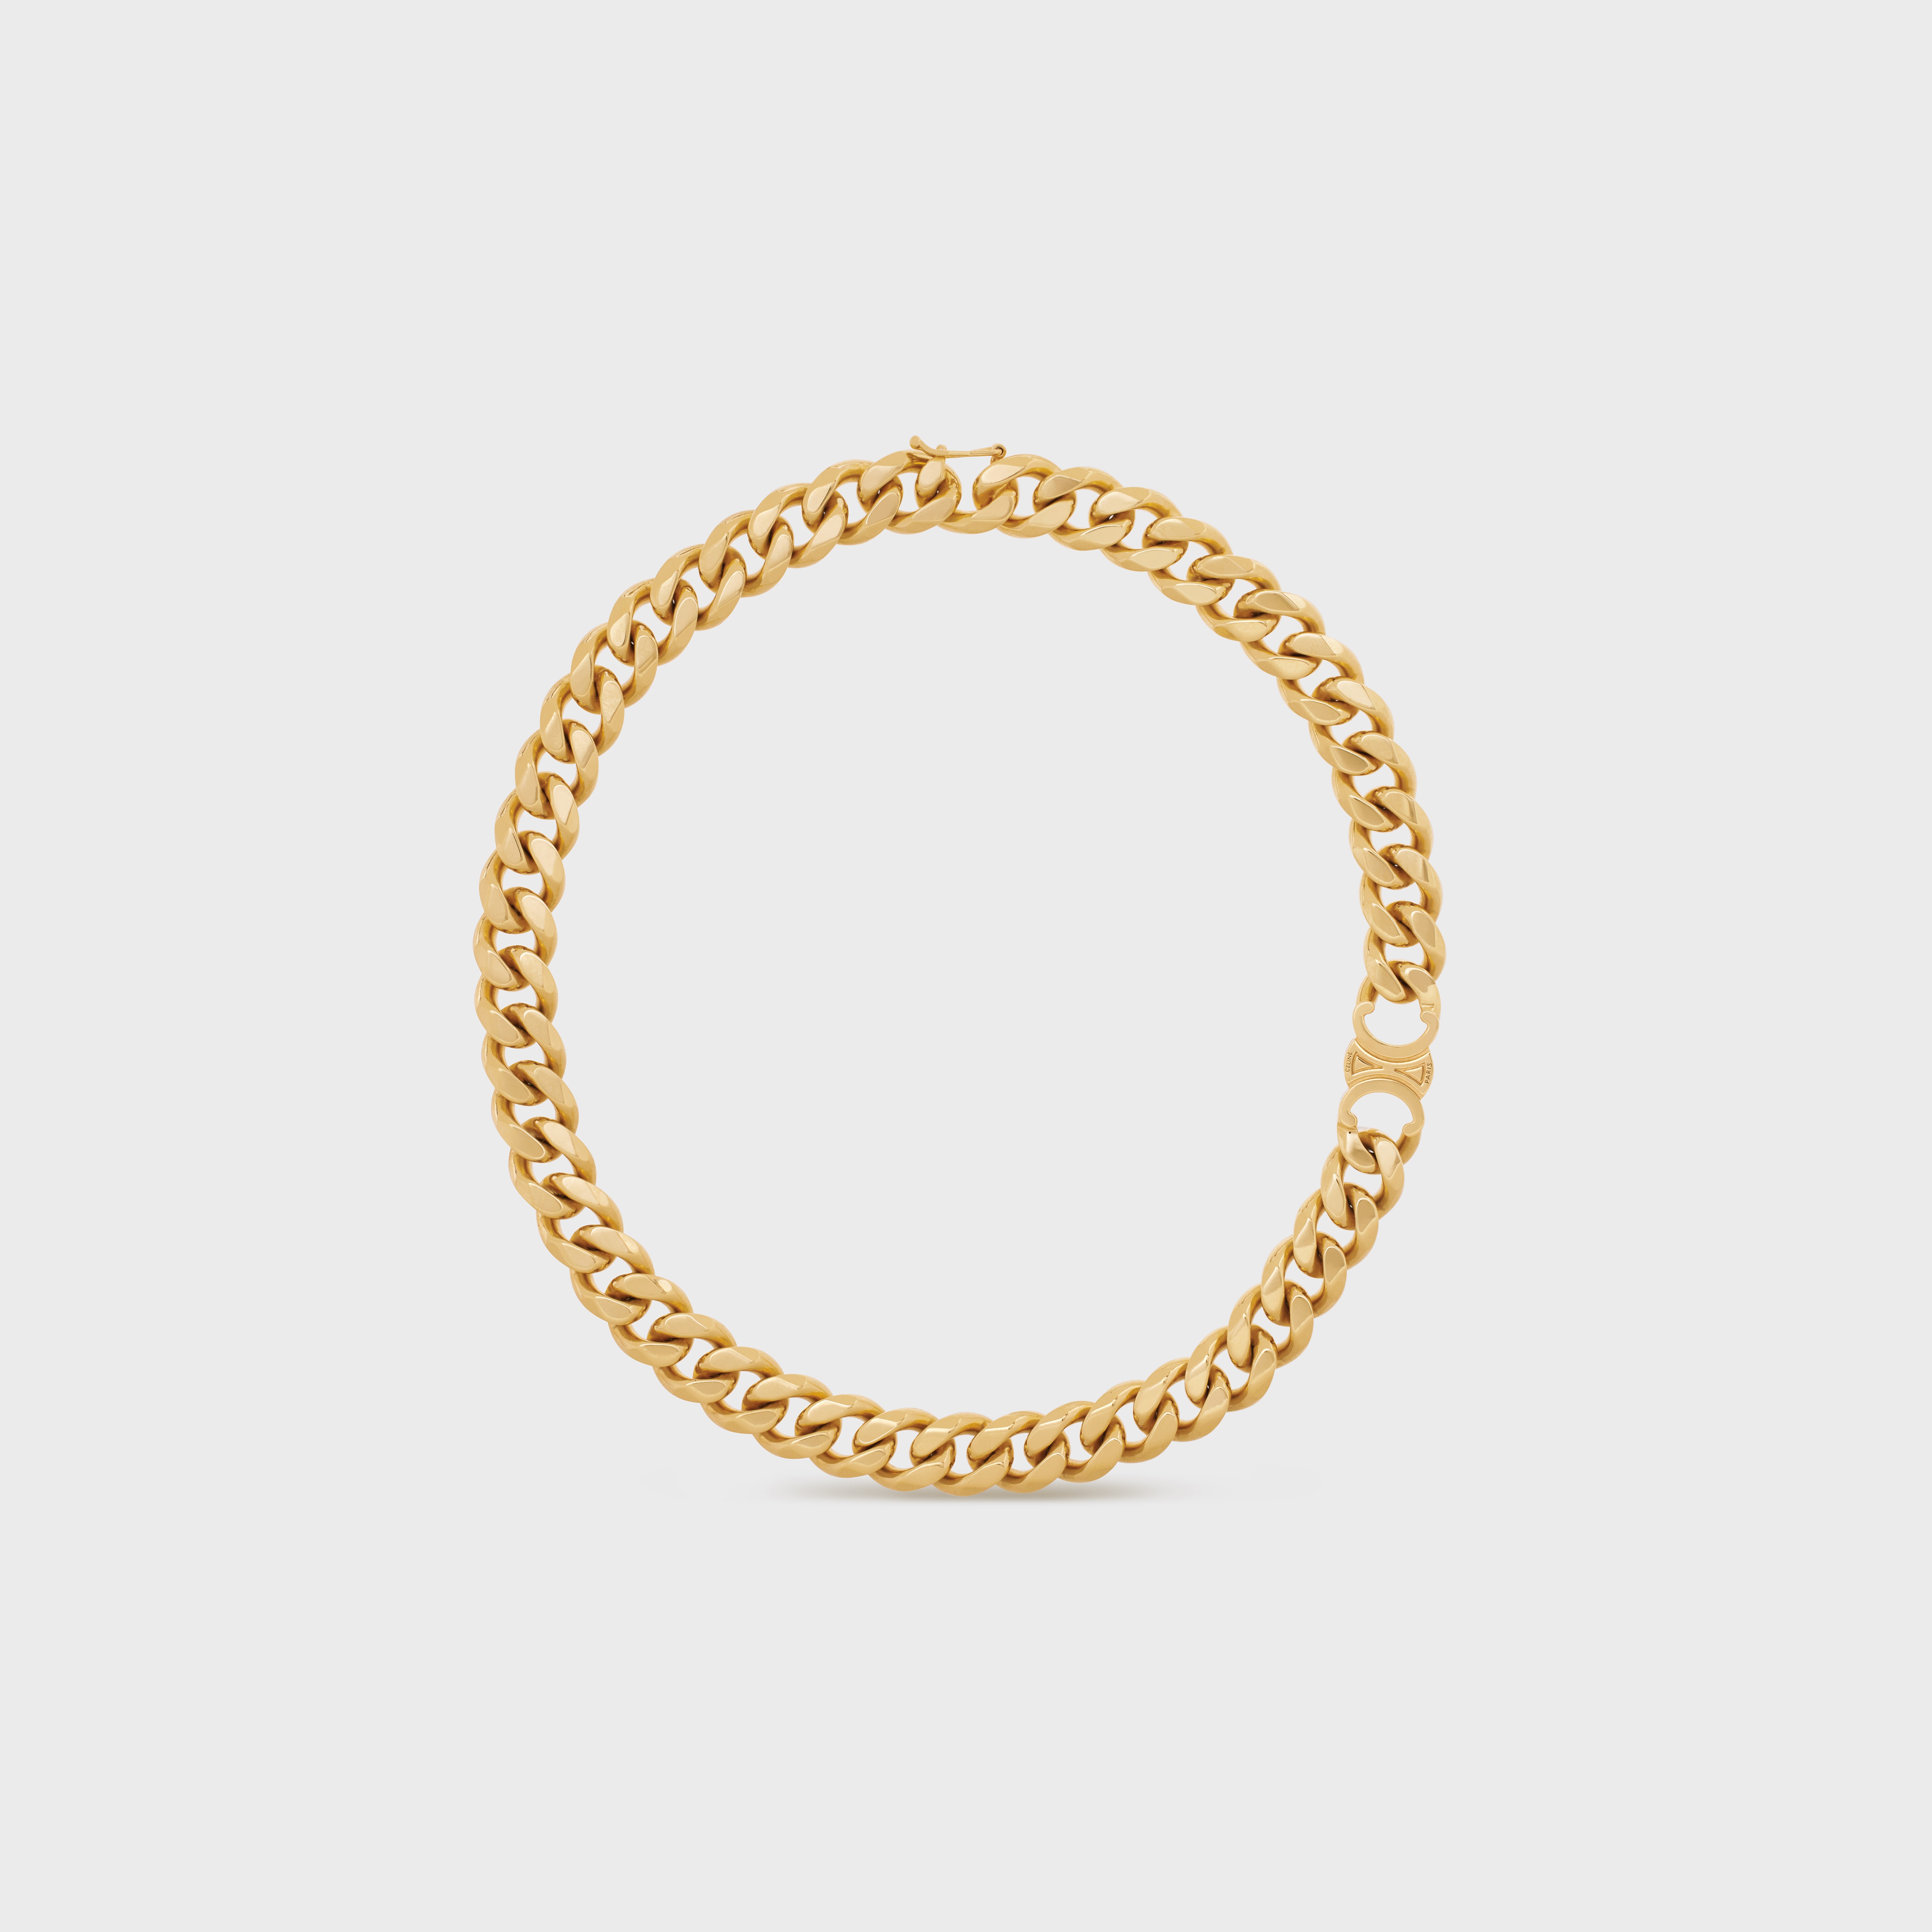 TRIOMPHE MINI TRIOMPHE NECKLACE IN BRASS WITH GOLD FINISH - GOLD